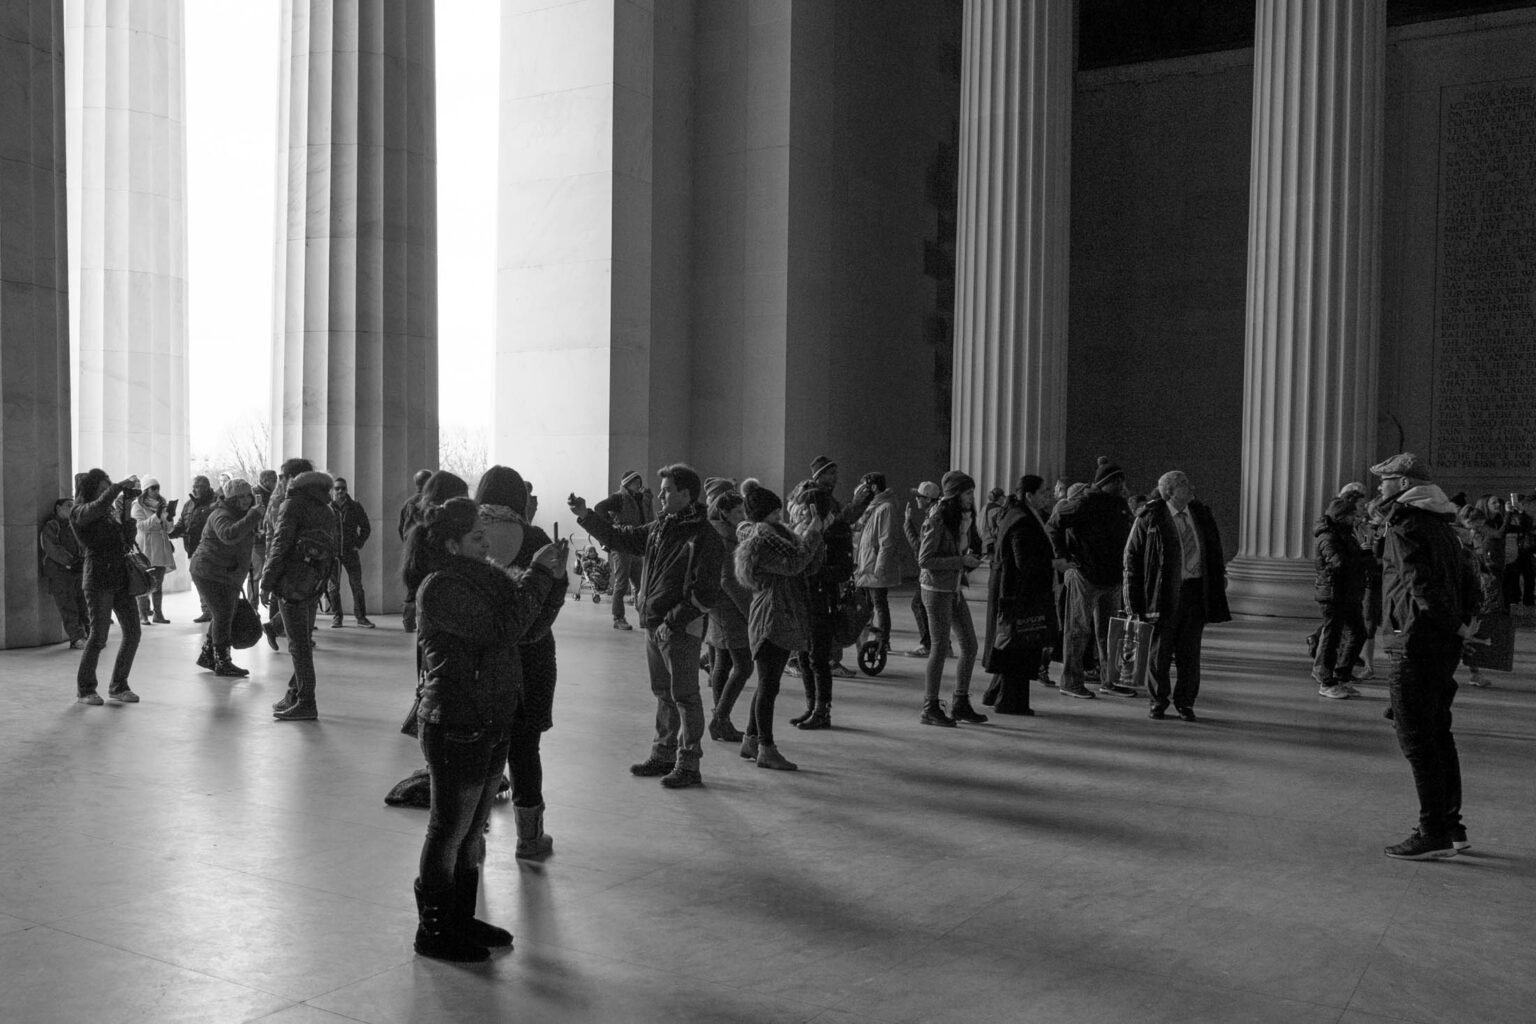 Photographing at the Lincoln Memorial